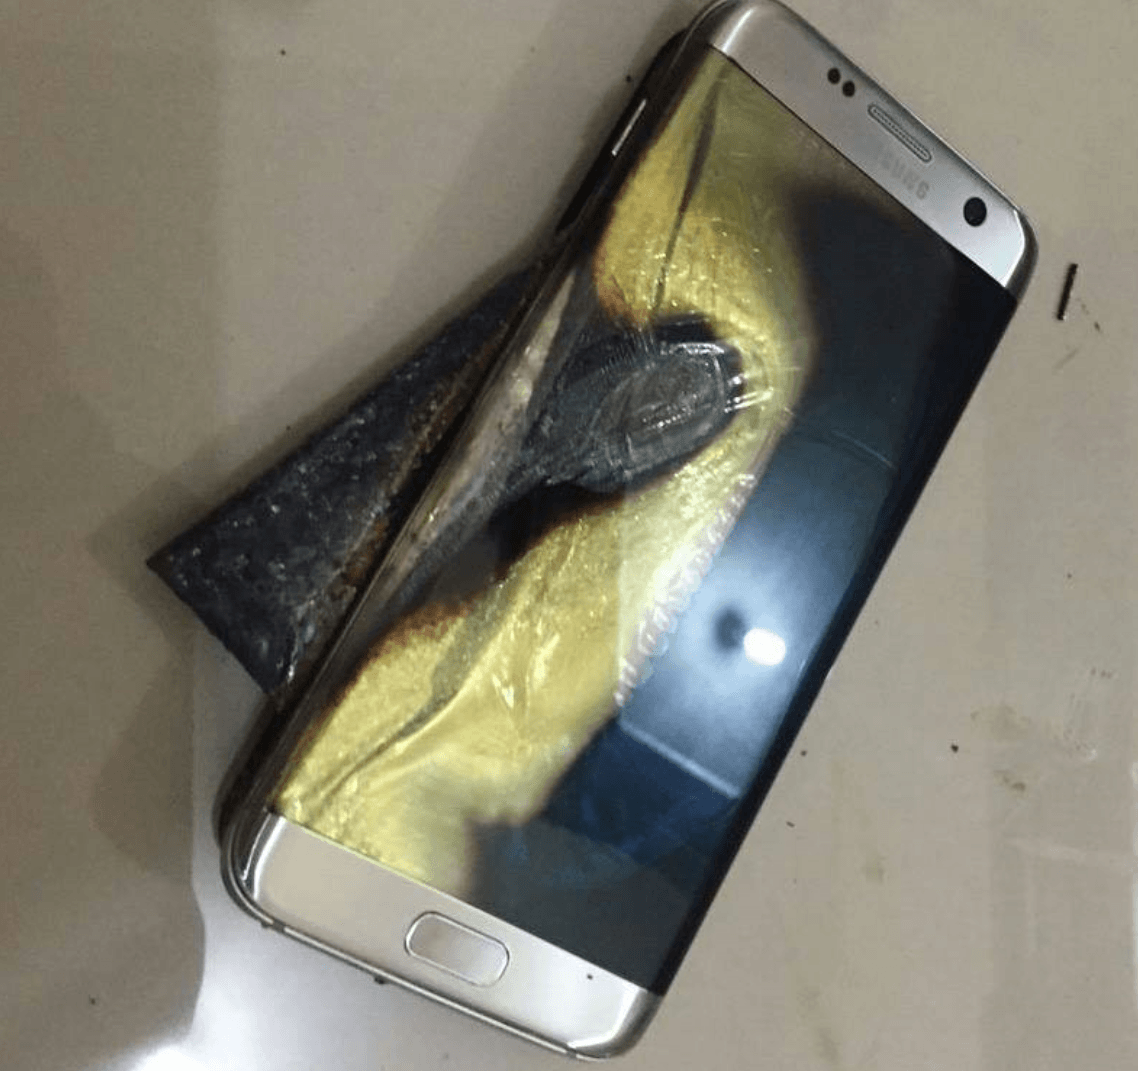 Samsung-Galaxy-S7-edge-catches-on-fire-while-being-recharged 2